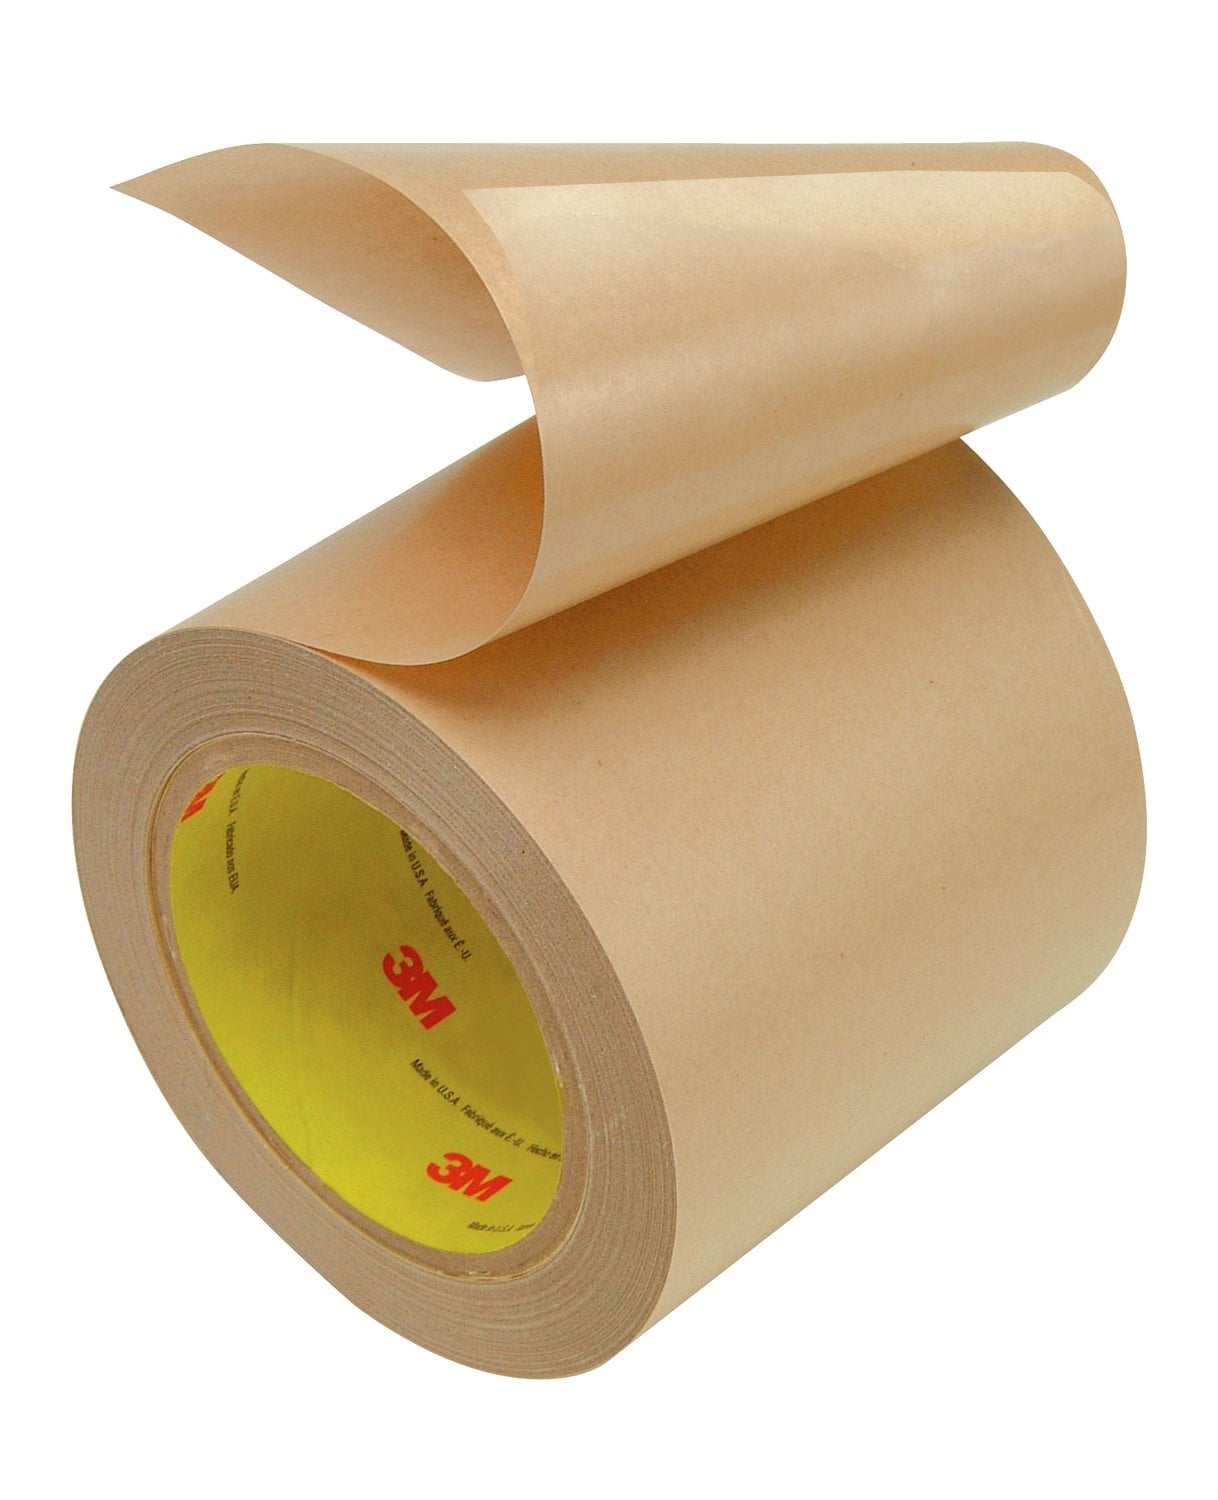 7000048795 - 3M Electrically Conductive Adhesive Transfer Tape 9703, 4 in x 36 yds,
2 rolls per case